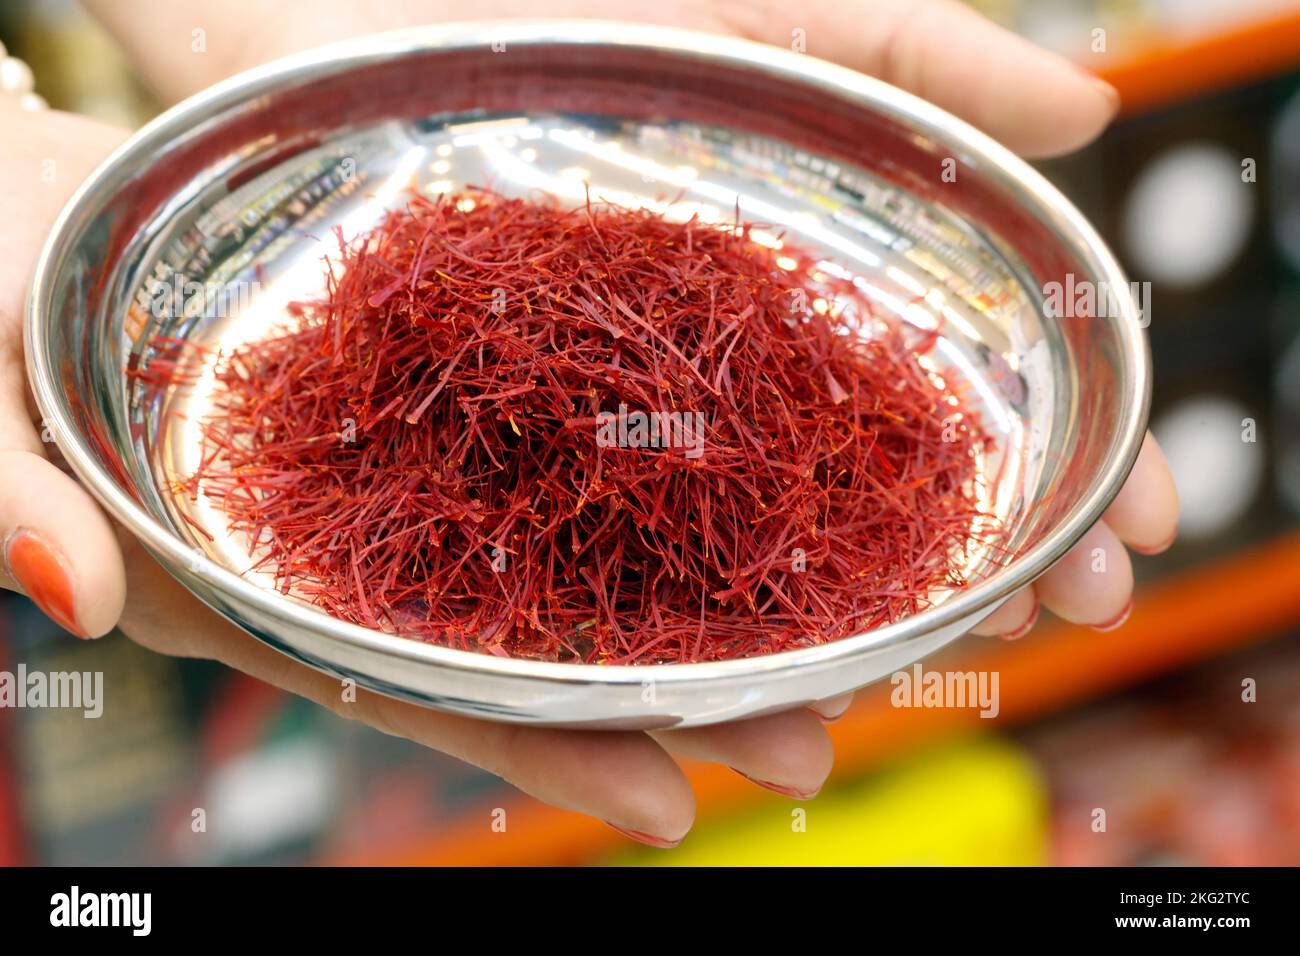 High quality red threads from saffron for sale at market.  United Arab Emirates. Stock Photo